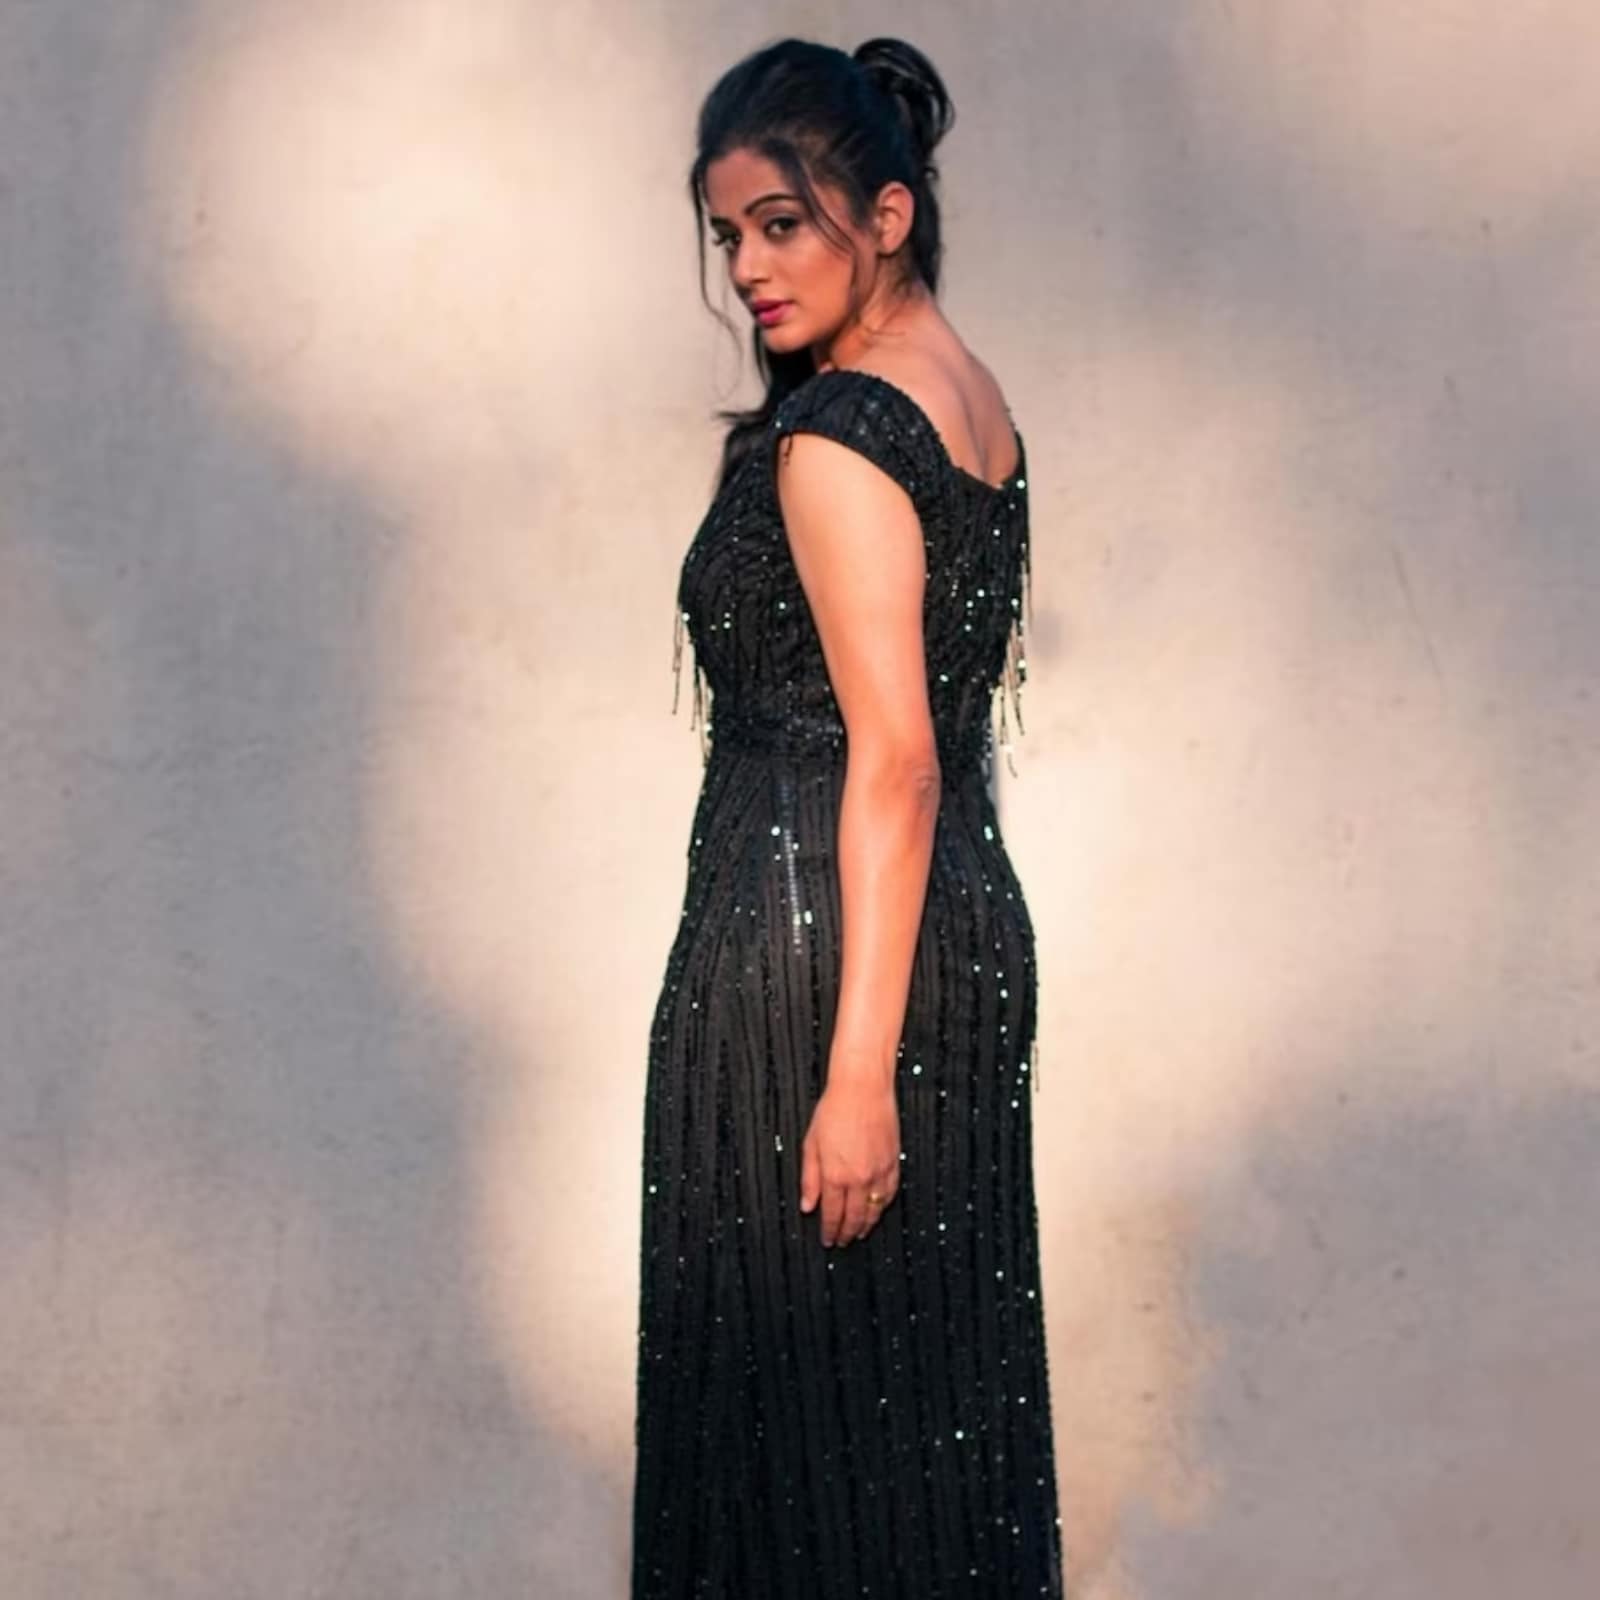 Actress Priyamani Looks Stunning In Black Gown, See Pics - News18